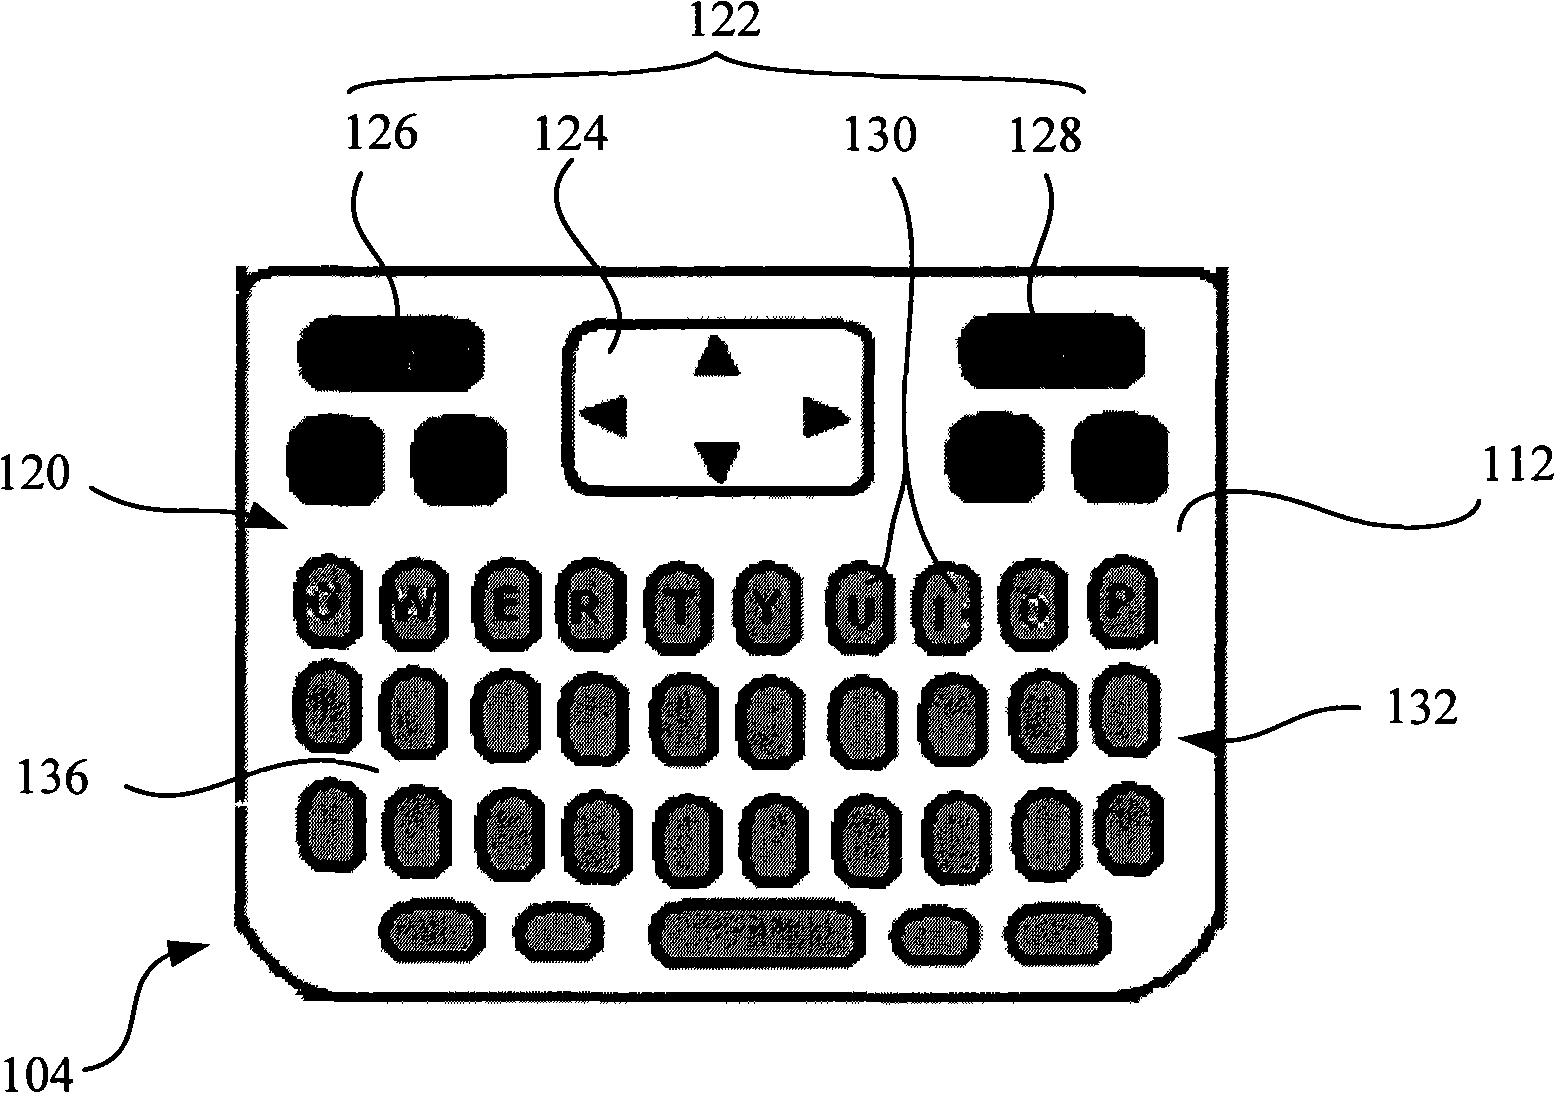 Electronic equipment with input device